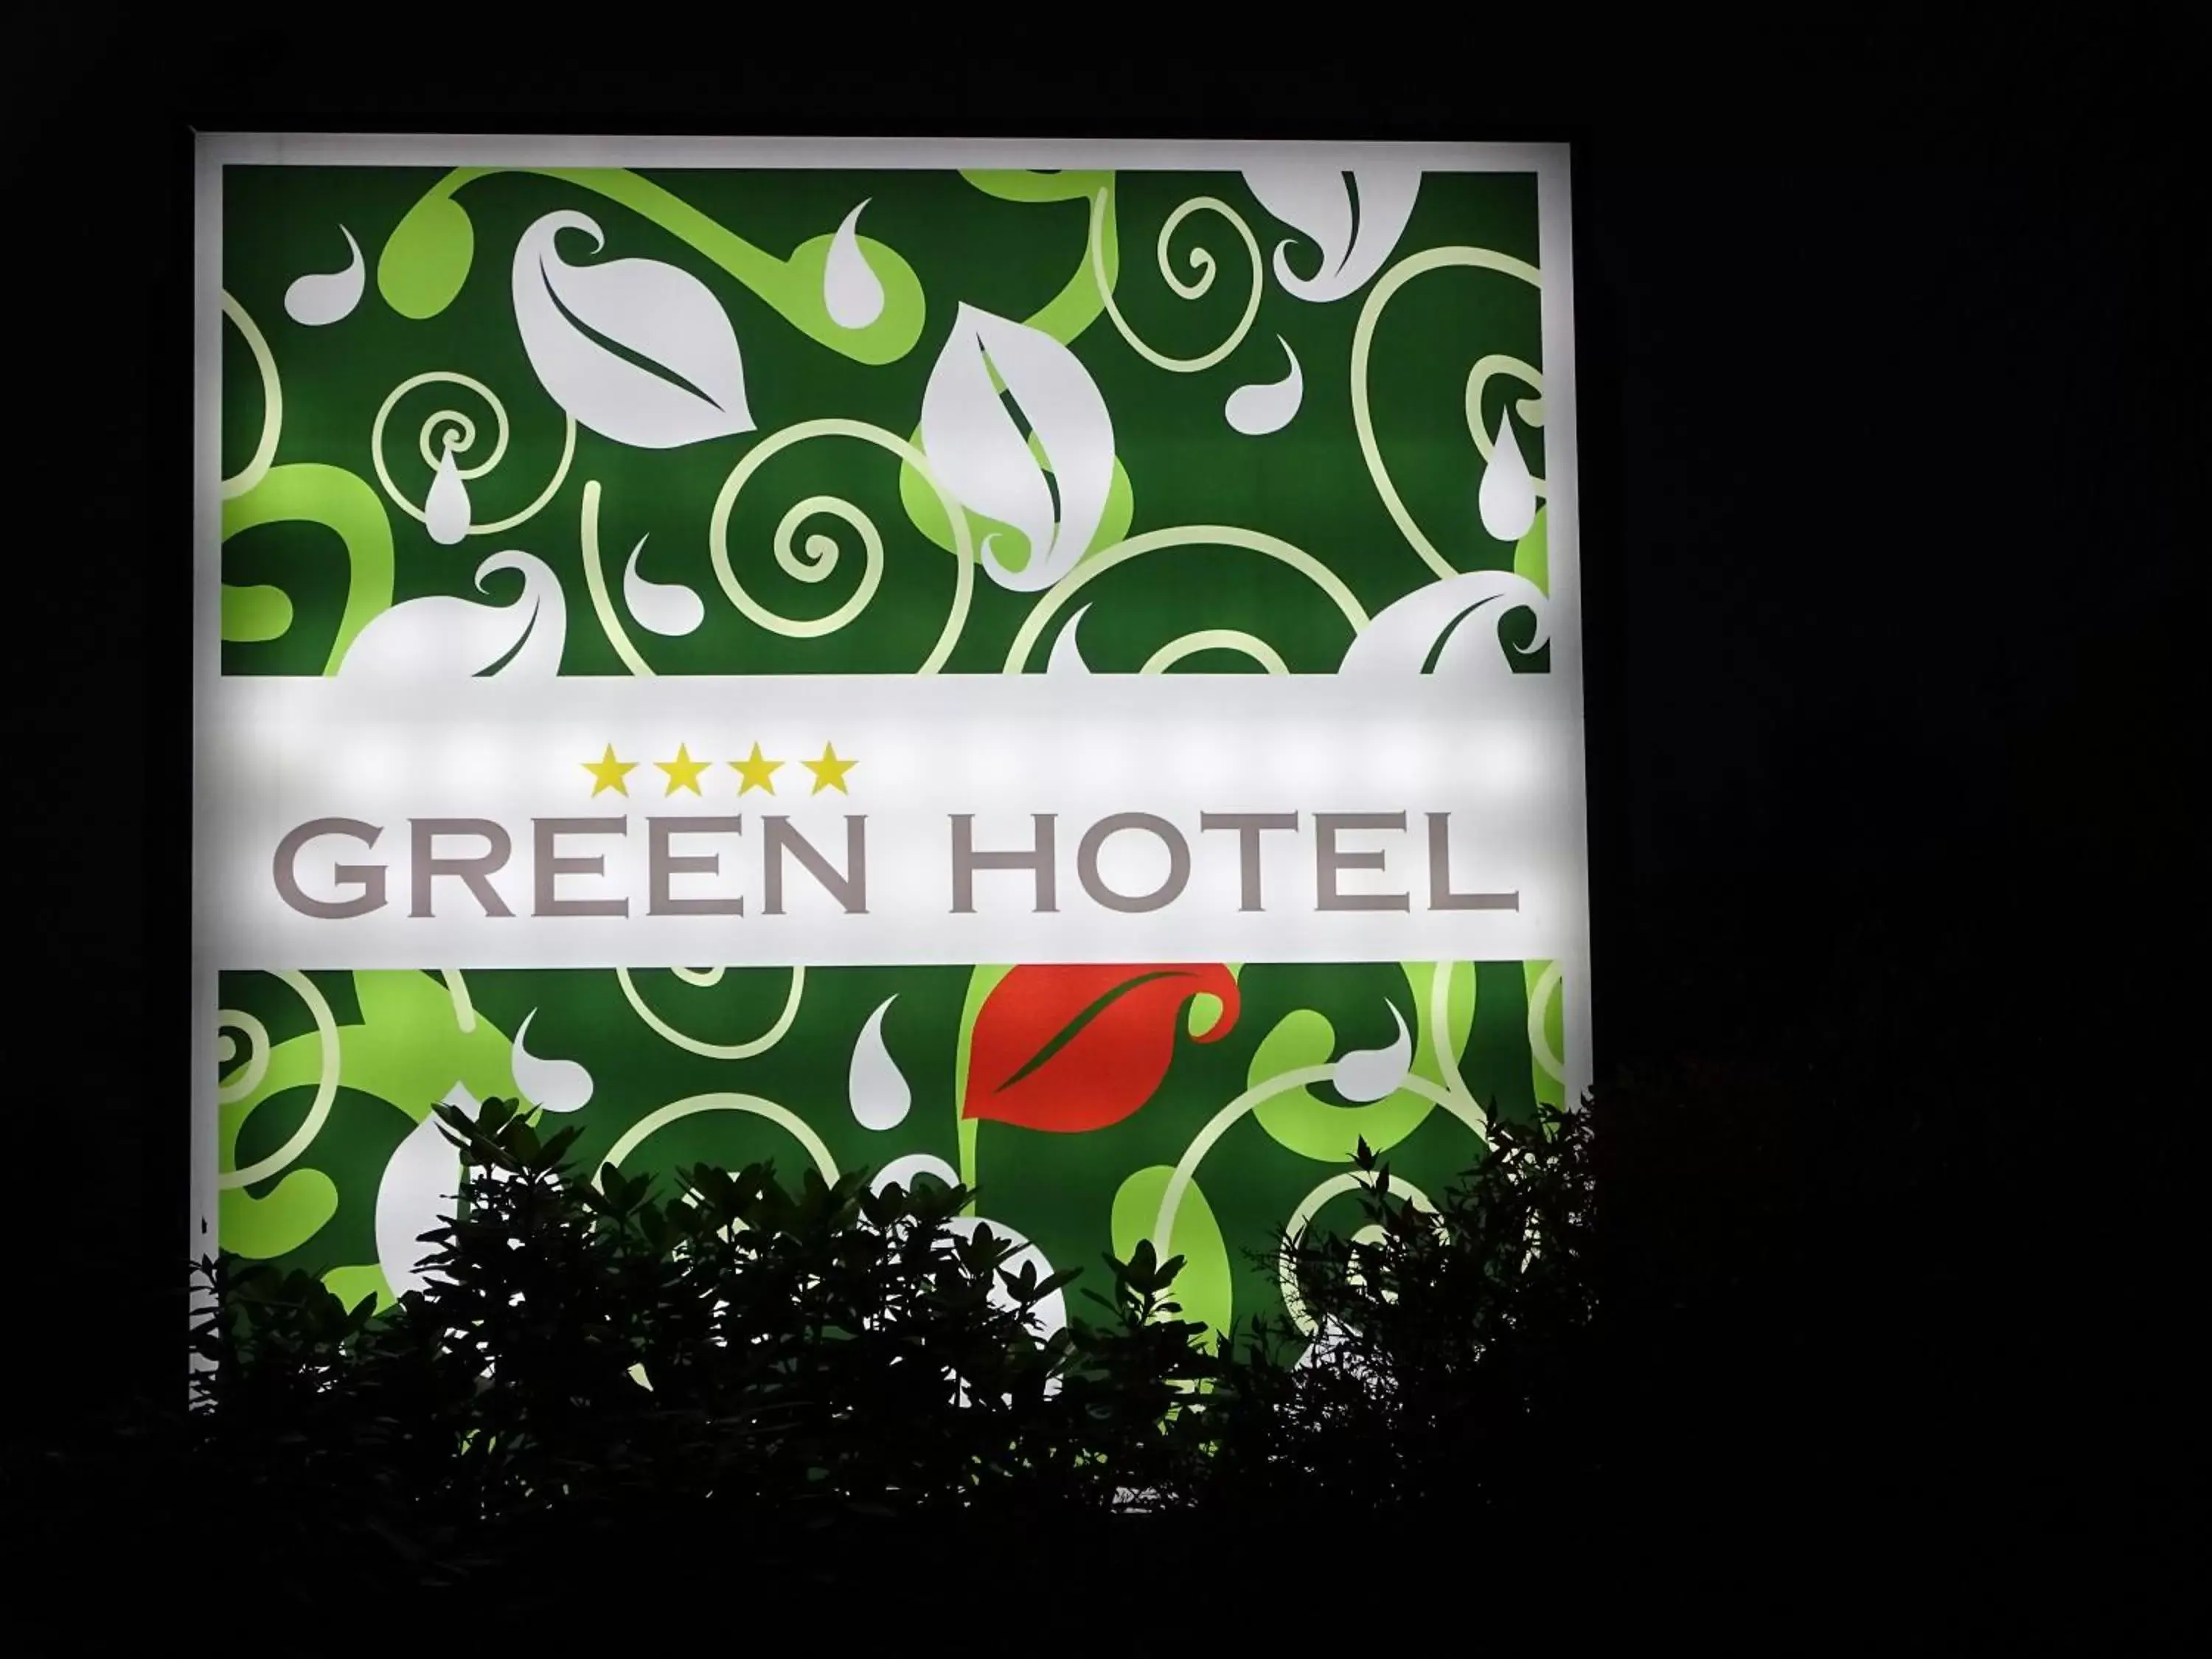 Property logo or sign in Green Hotel Motel